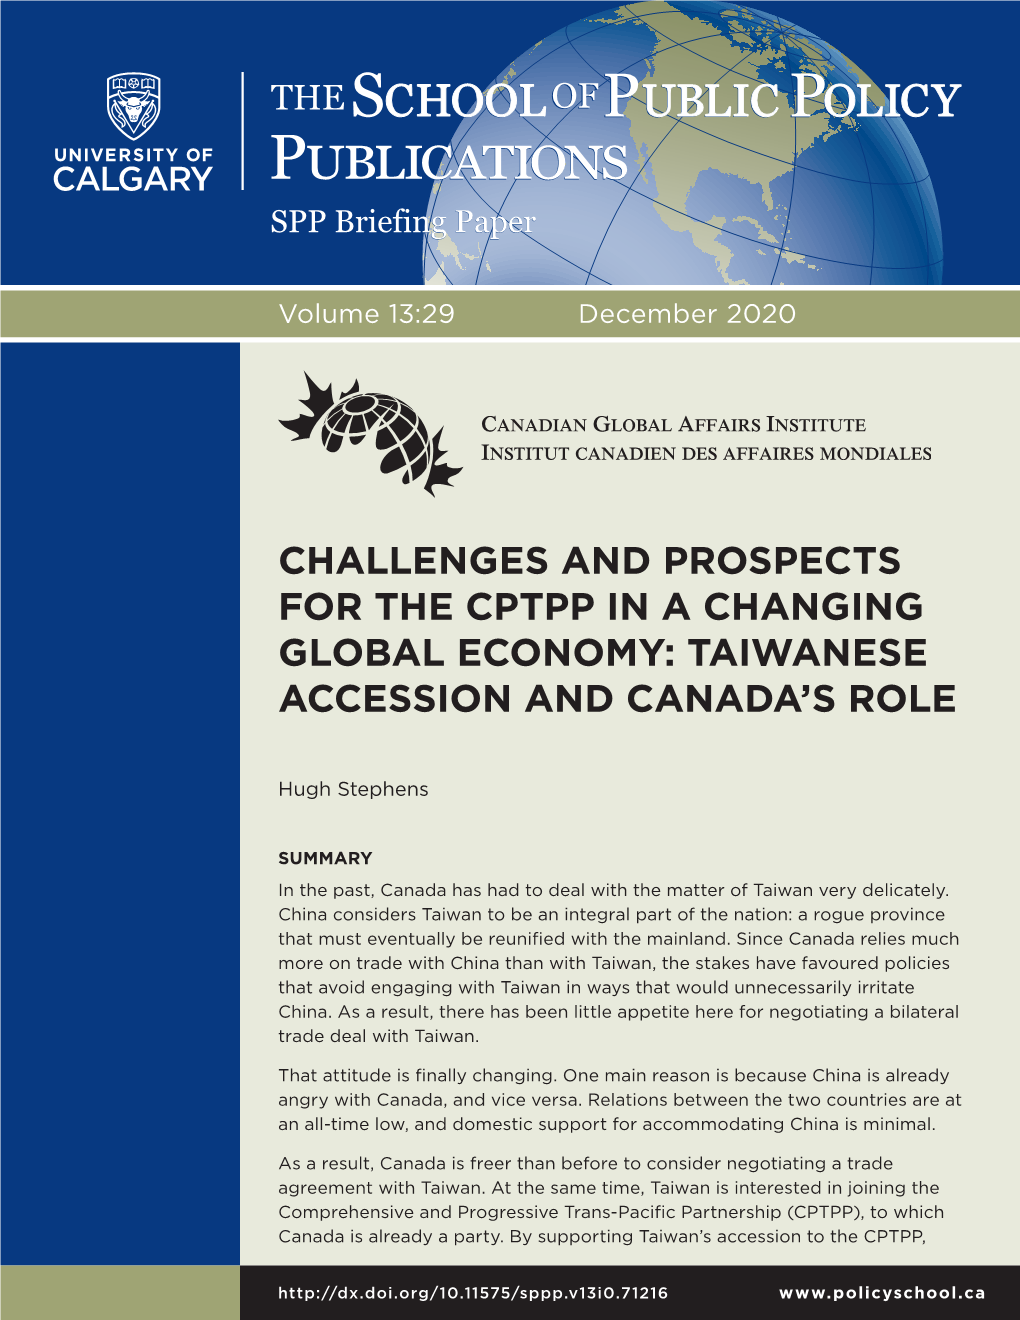 Taiwanese Accession and Canada's Role